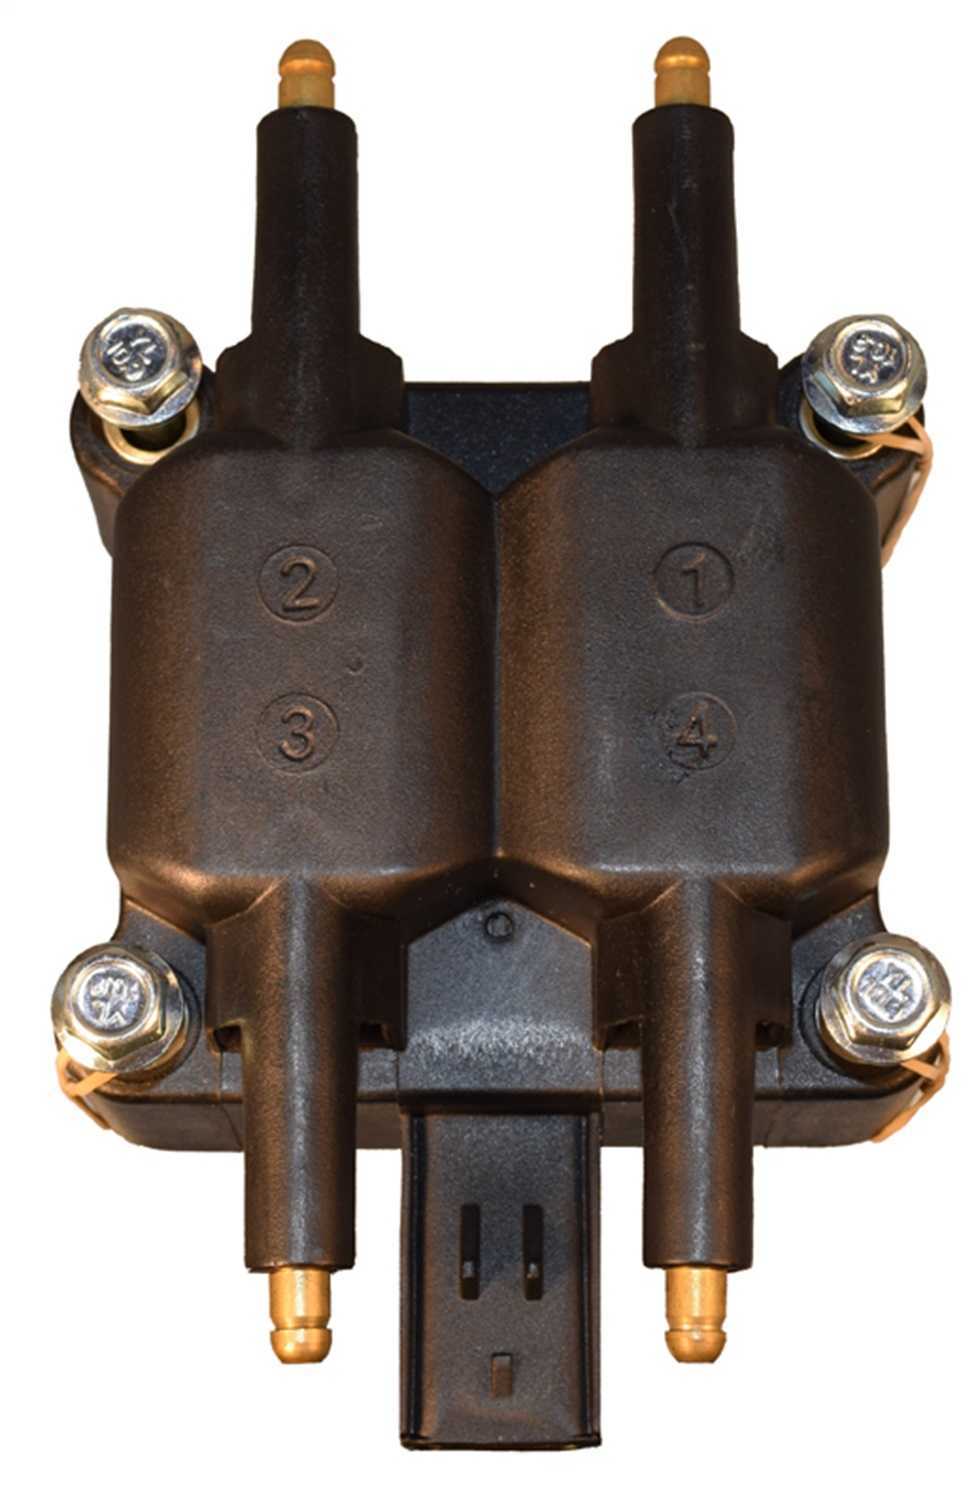 KARLYN/STI - Karlyn-STI Ignition Coil Pack - KLY 20372